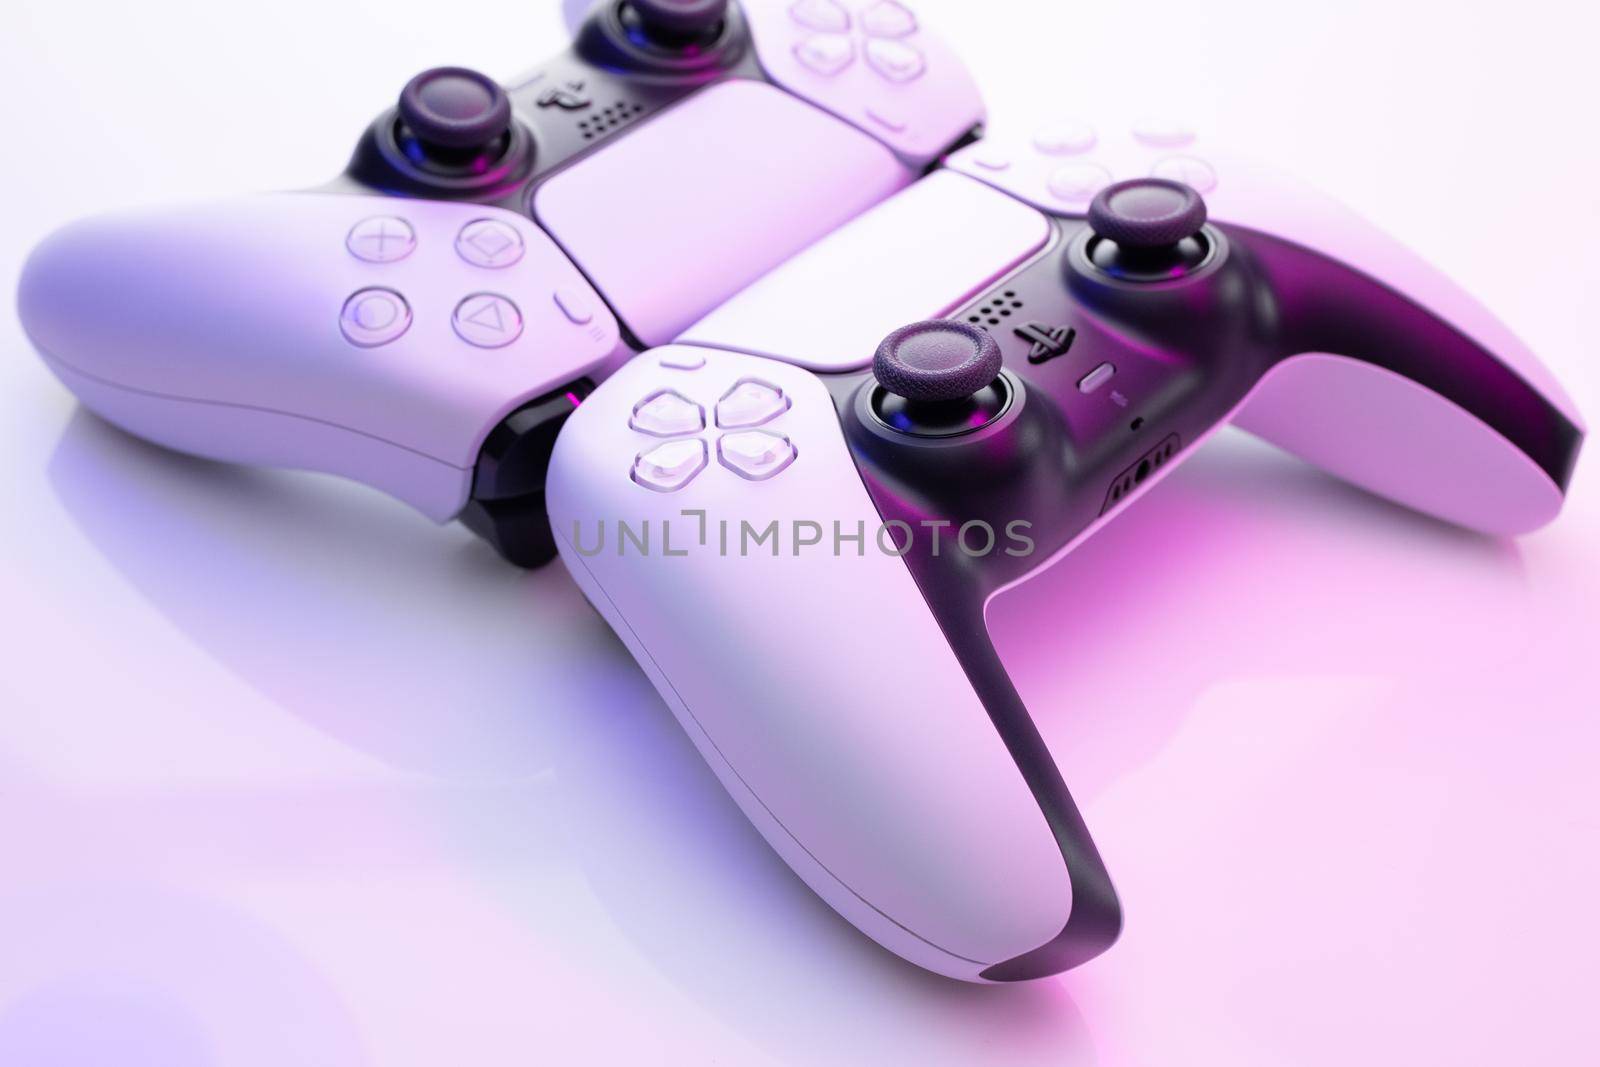 Lviv, Ukraine - February 27 2021: Two joysticks from Sony PlayStation 5 TV game console. White controllers from revolutionary TV game box by uflypro